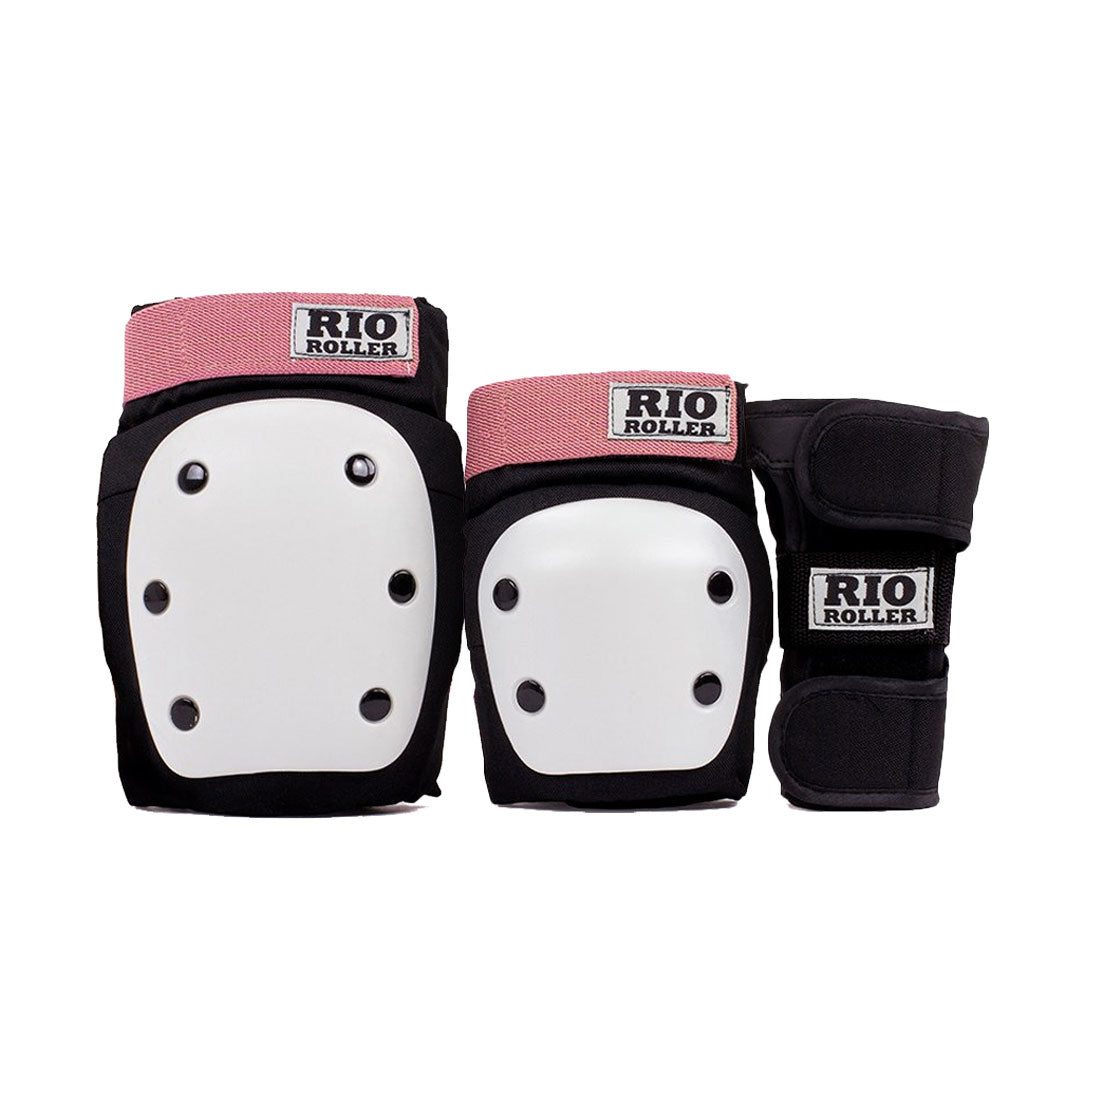 Rio Roller Triple Pad Set - Black/Rose Gold Protective Gear